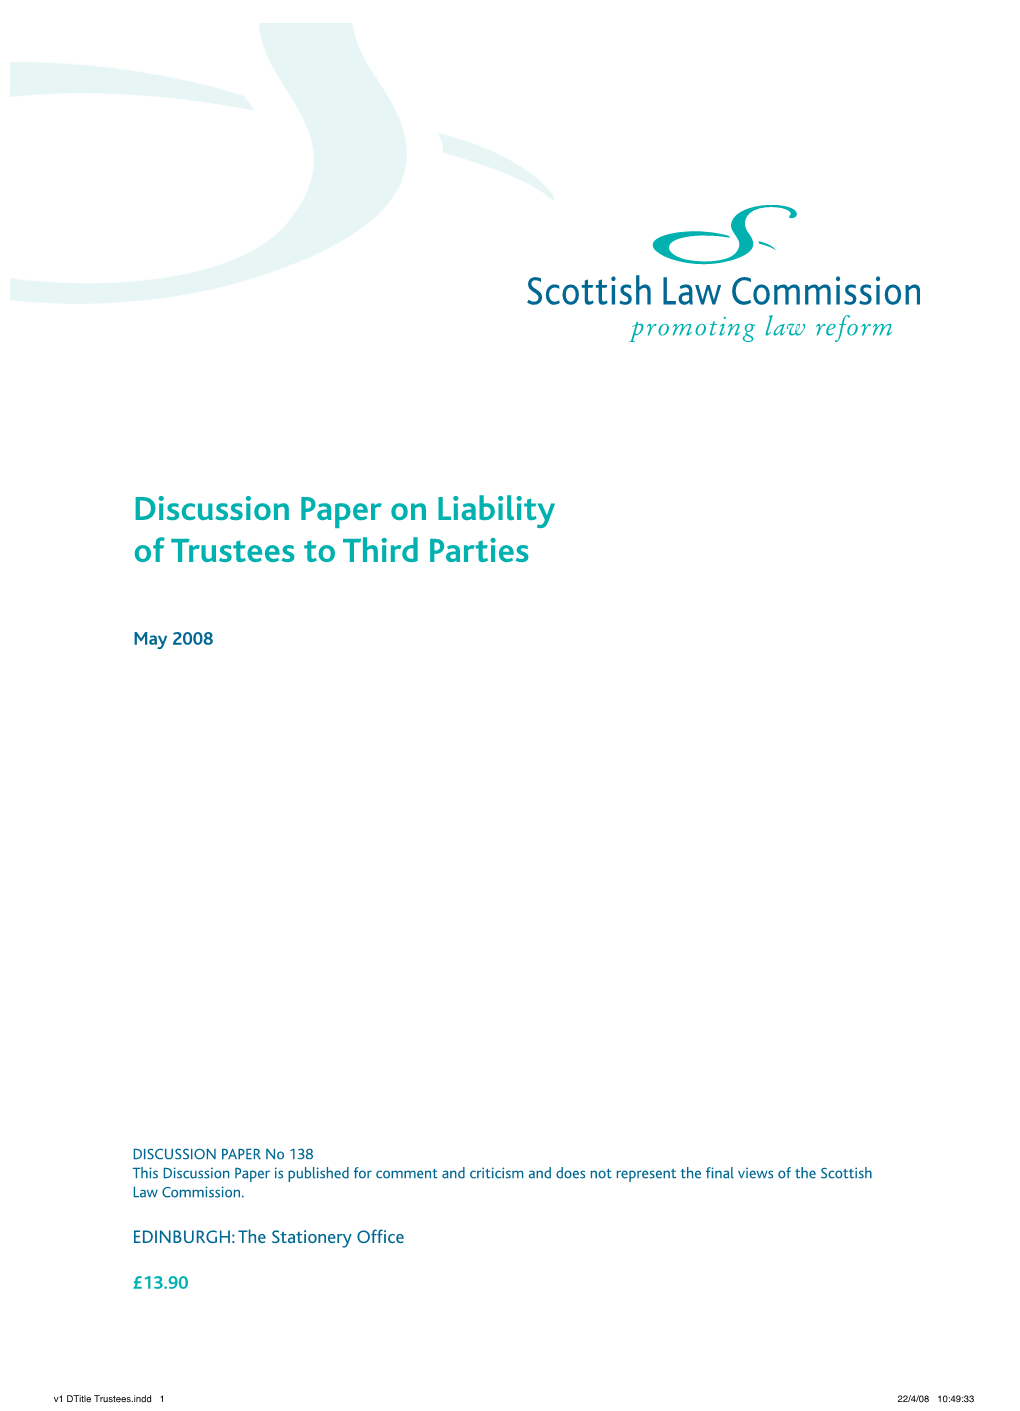 Liability of Trustees to Third Parties